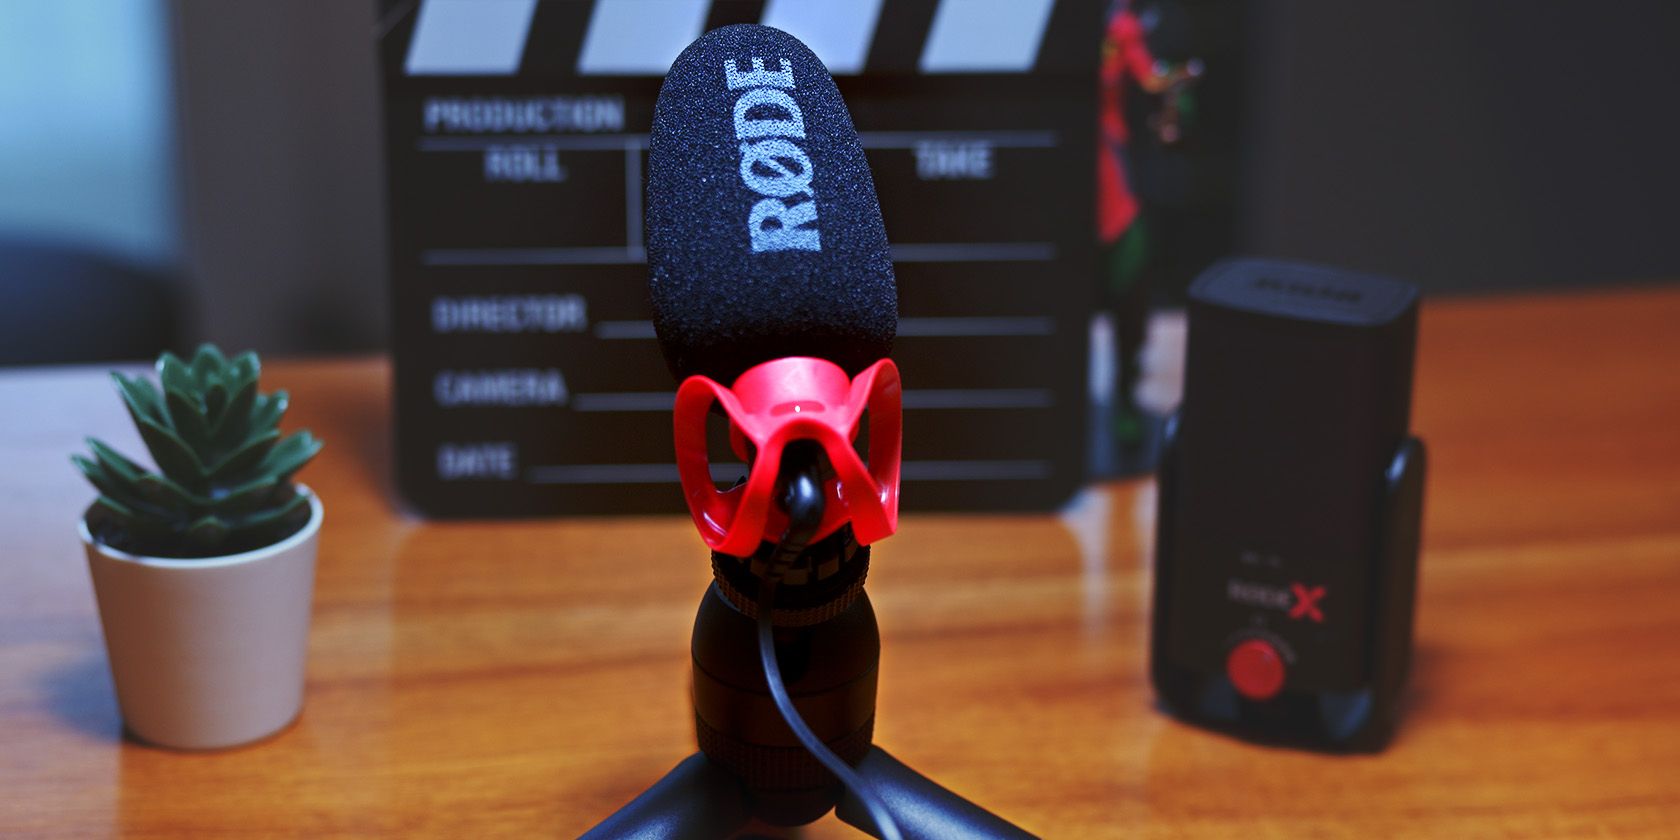 RØDE VideoMicro II Review: VideoMic GO II Quality but More Portable